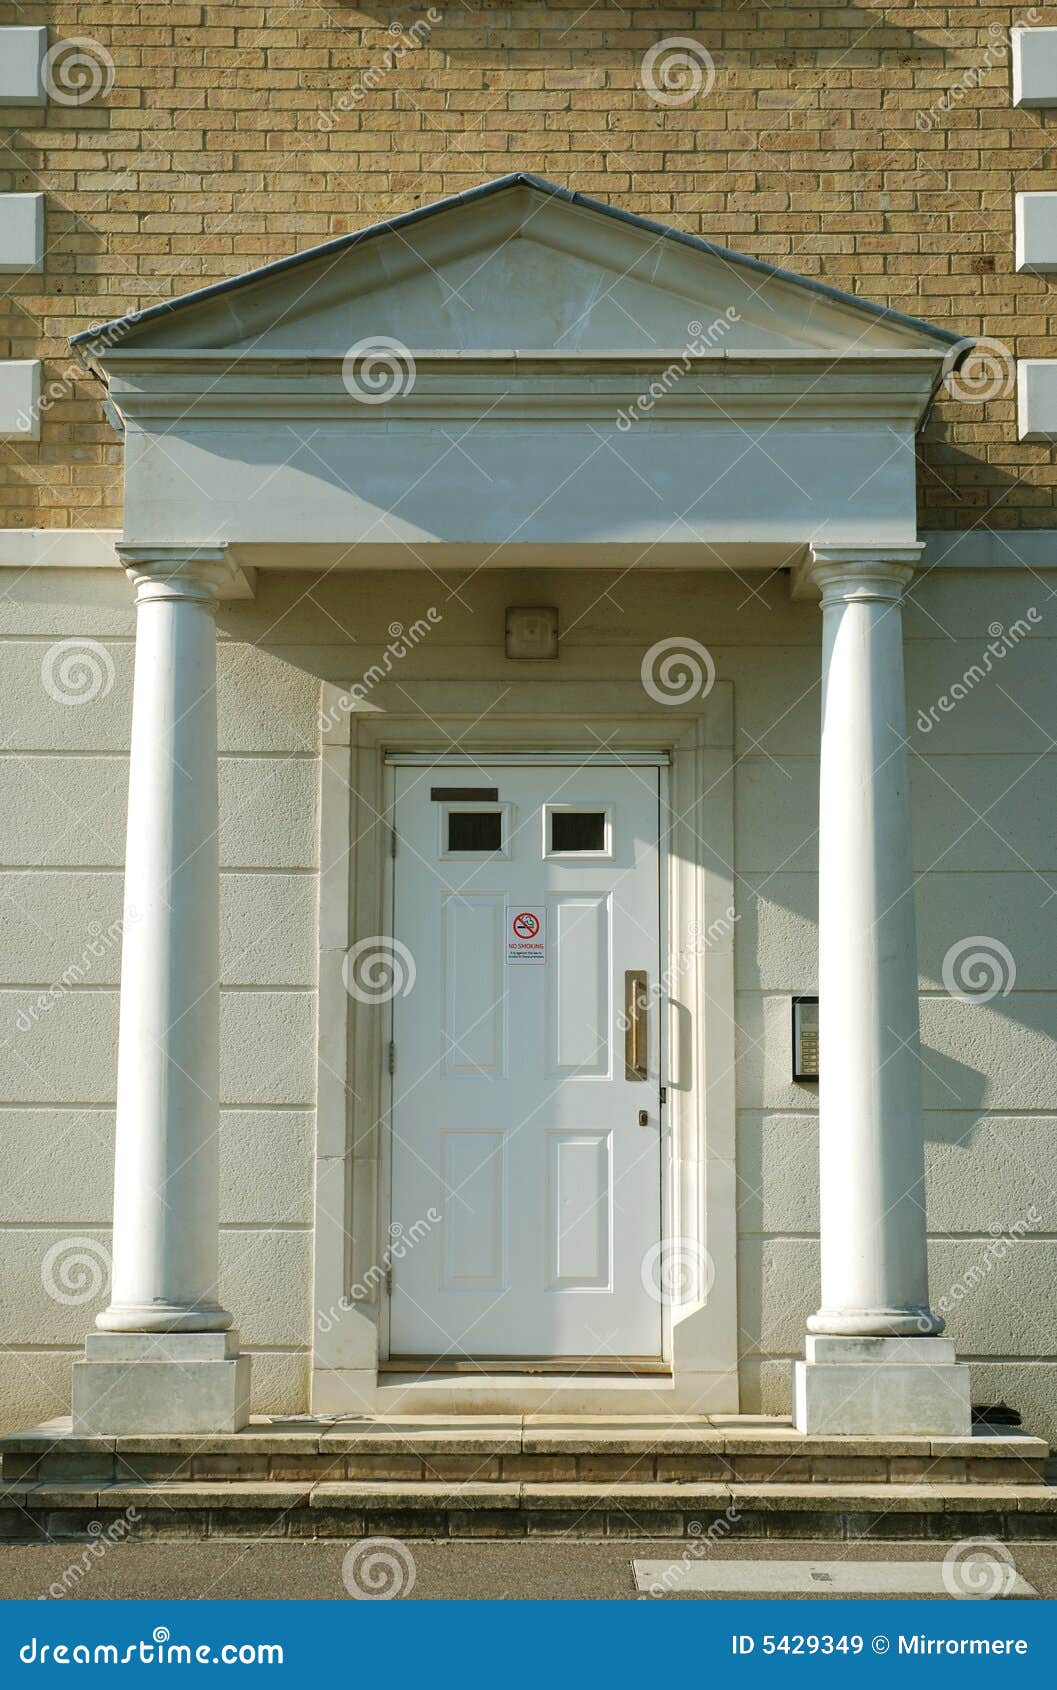 Front Door A House Or Apartment With Welcome Mat And White Wooden Bannister  Stock Photo, Picture and Royalty Free Image. Image 137676465.